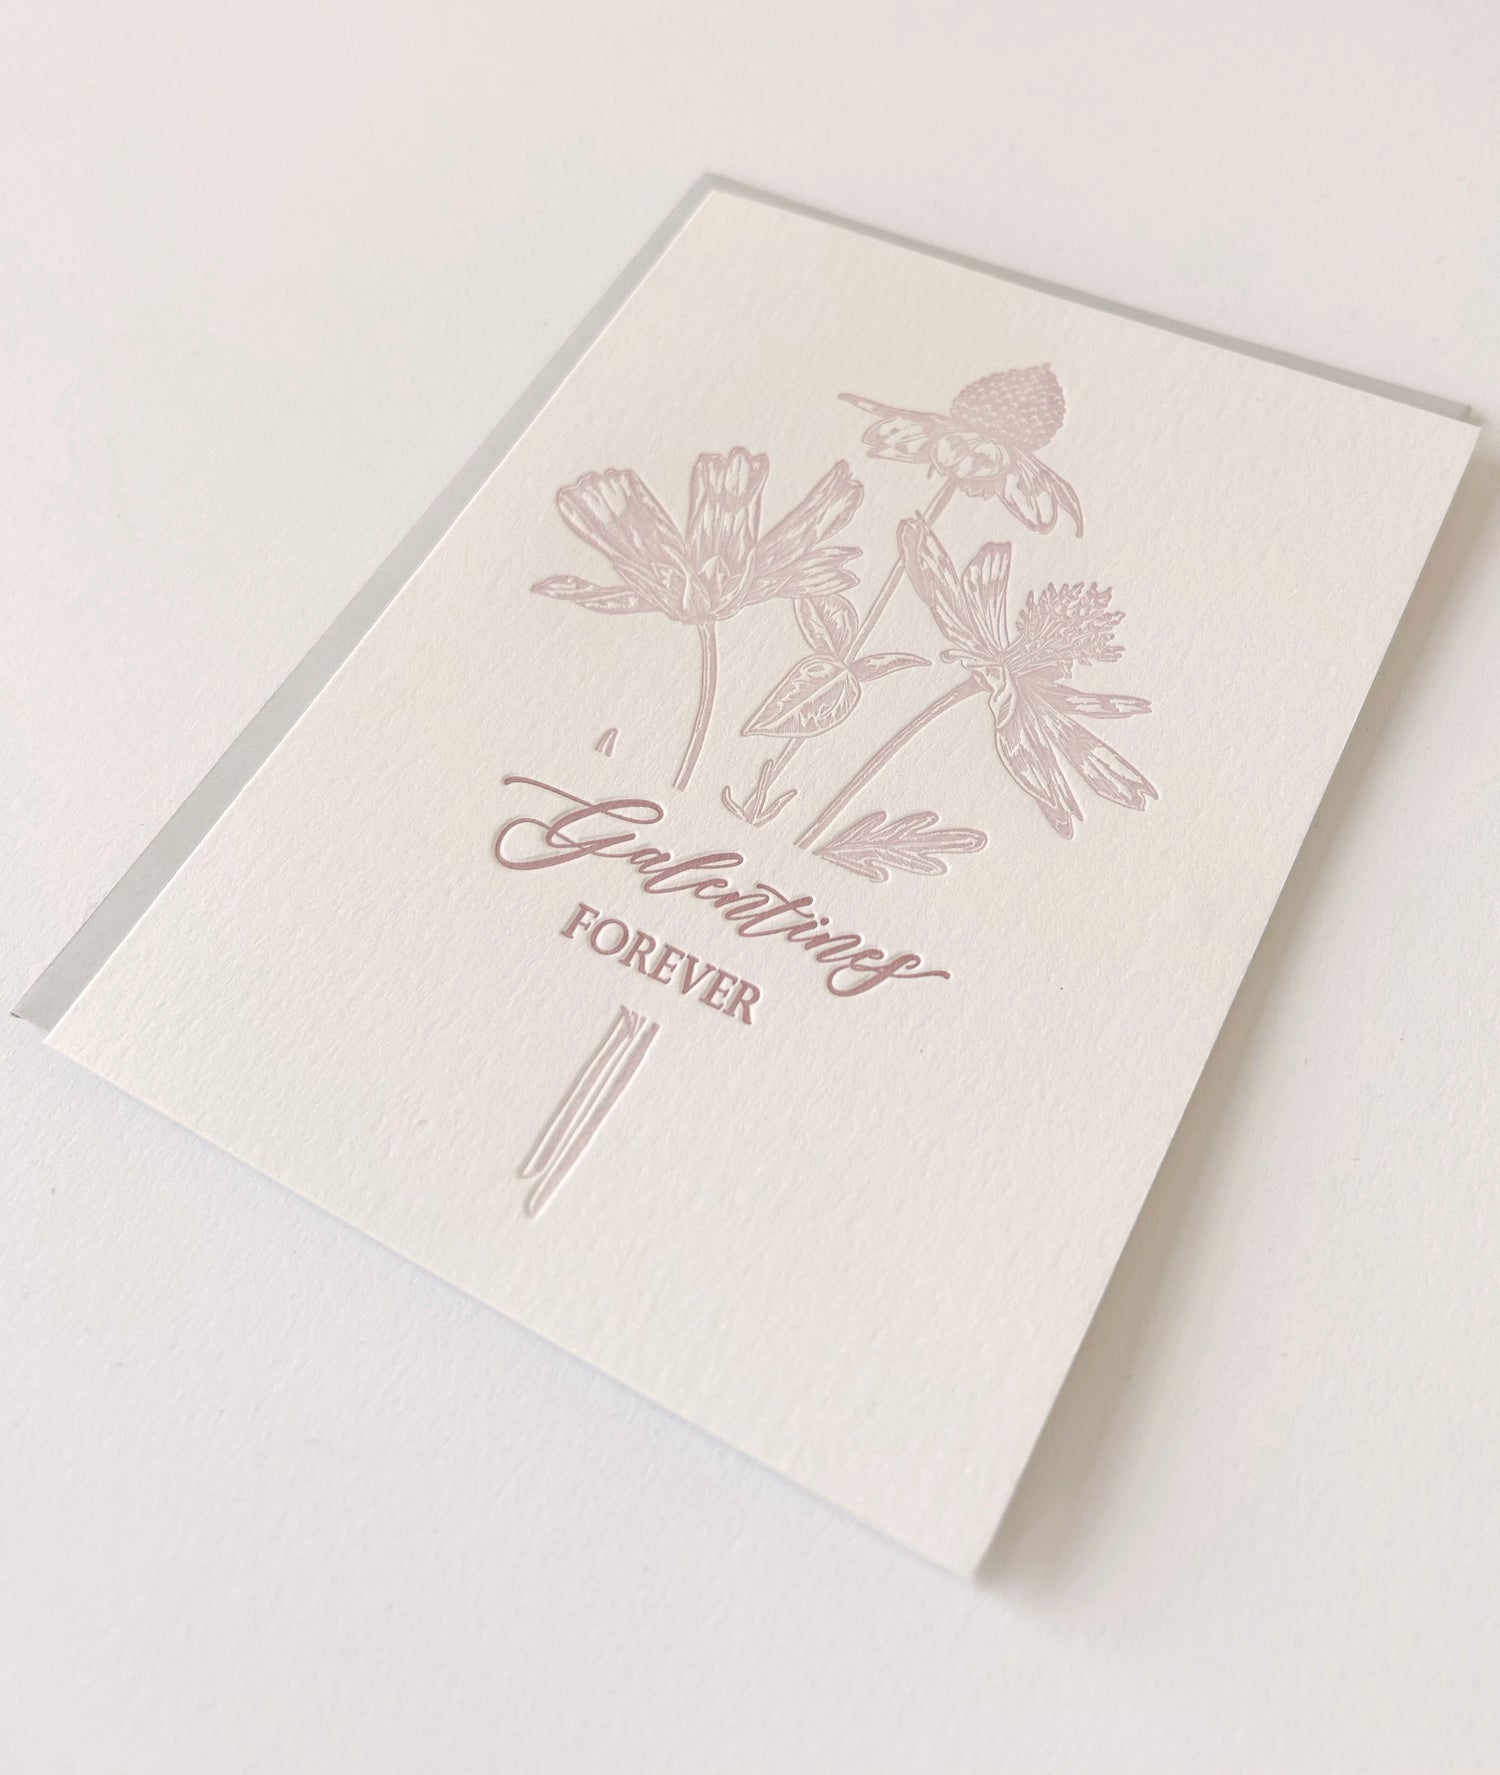 Letterpress love card with florals that says "Galentine's Forever" by Rust Belt Love